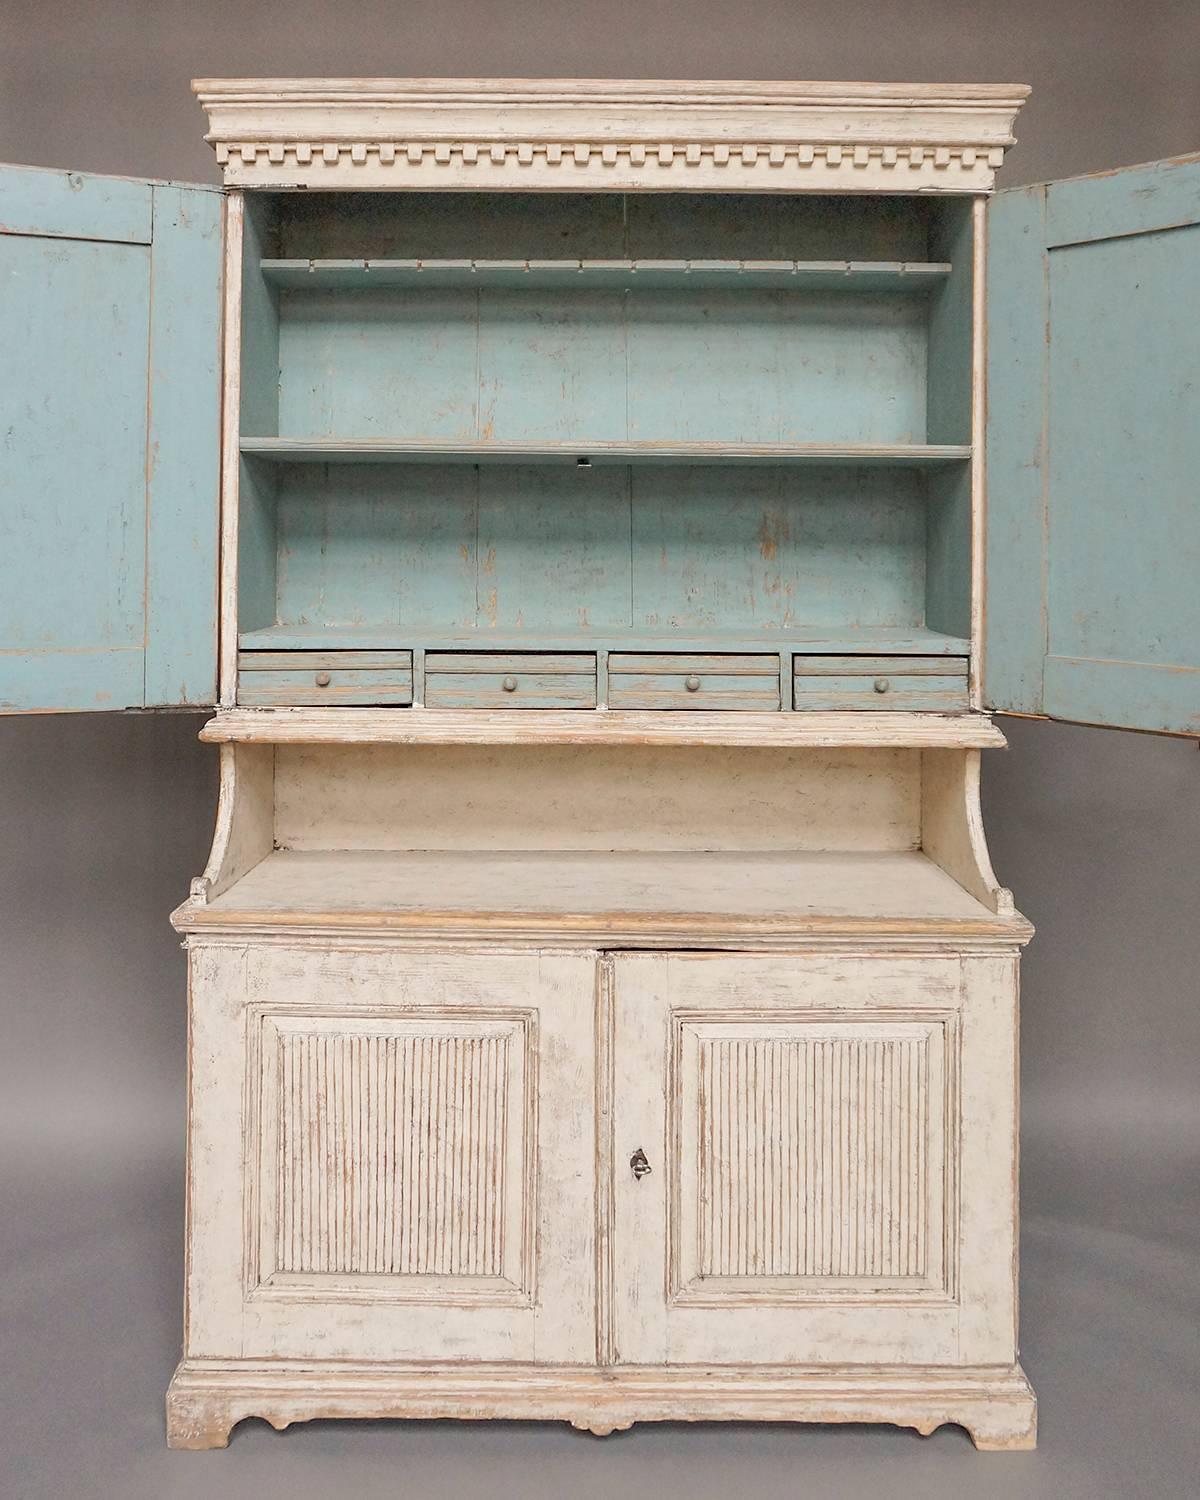 Period stepback cabinet in two parts from Värmland, Sweden, circa 1820. The upper section has two paneled doors with reeded lozenges under a cornice with dentil molding. The interior has two shelves, one notched for spoons, and four small drawers.